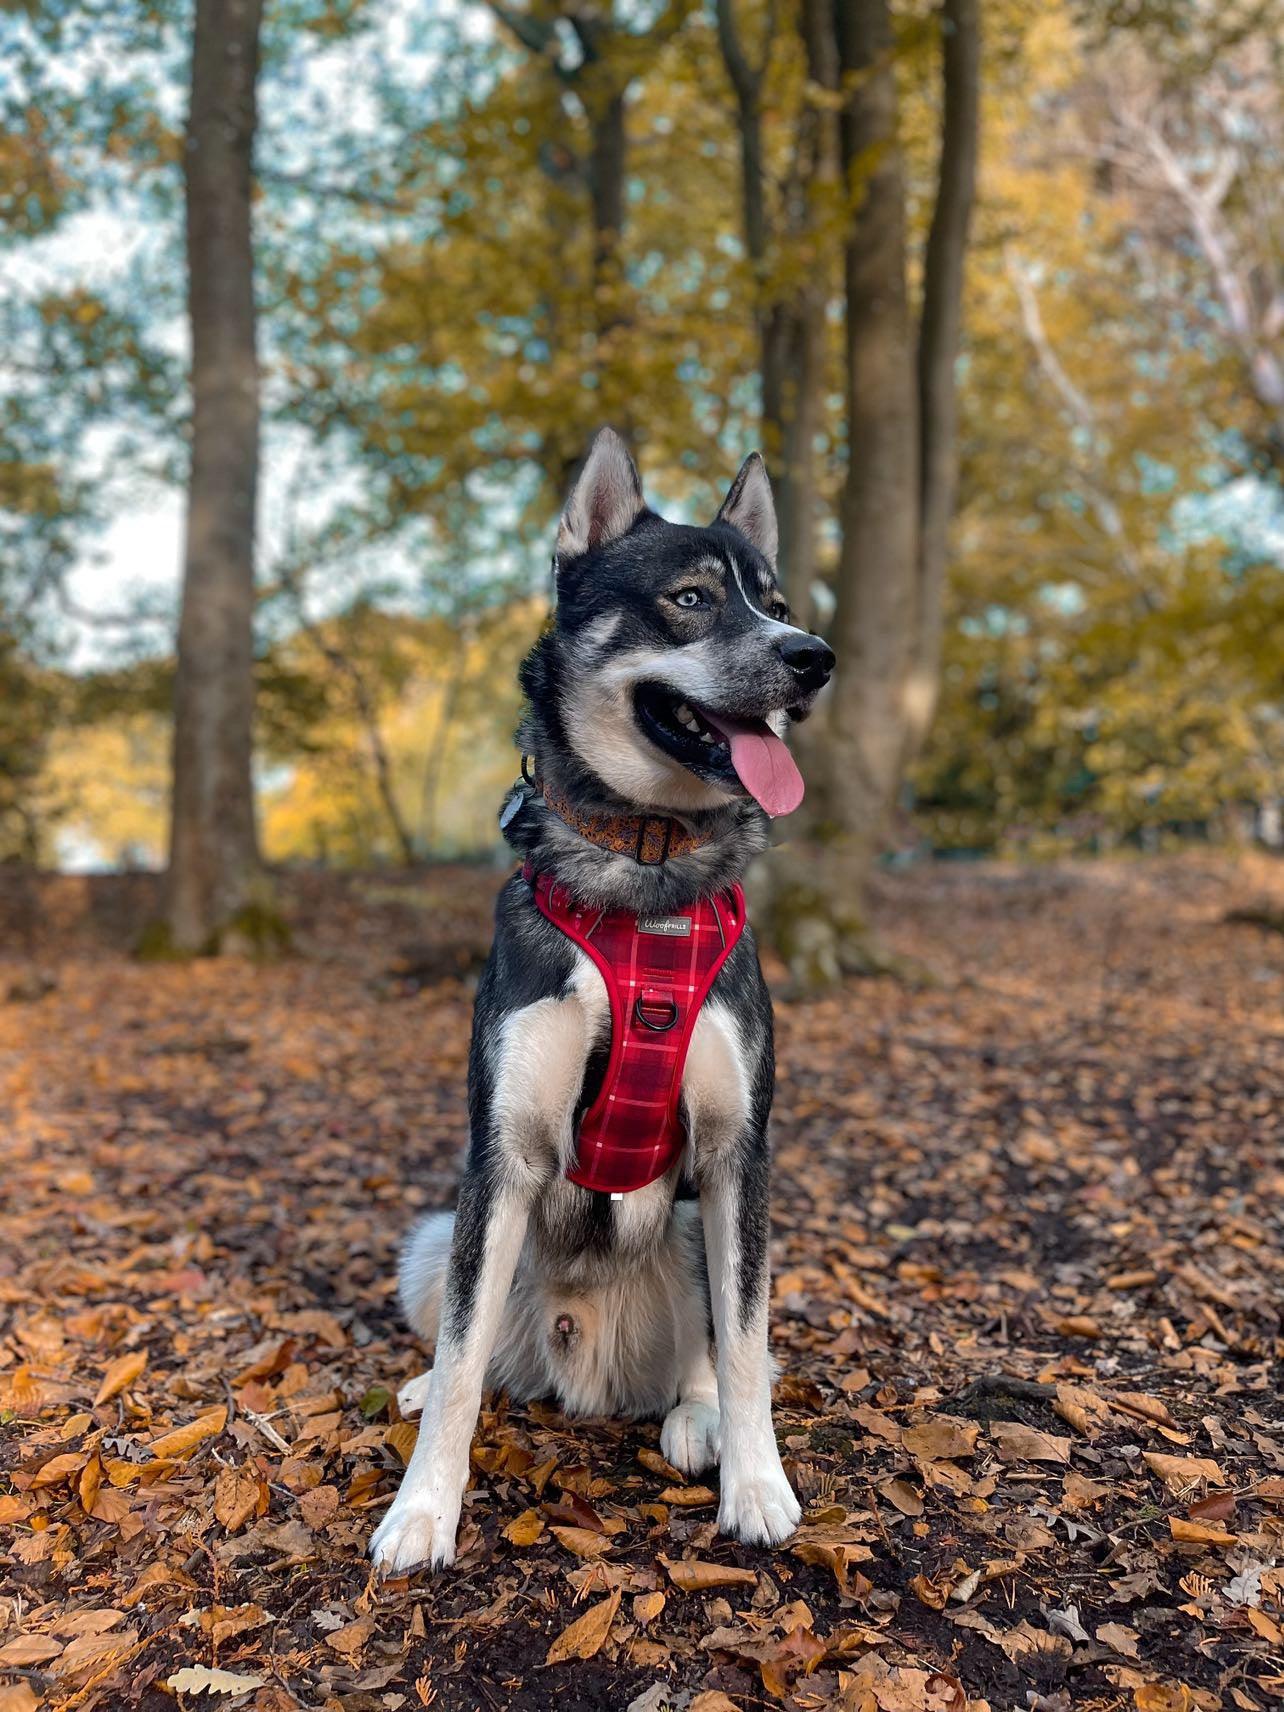 Husky wearing a red dog harness